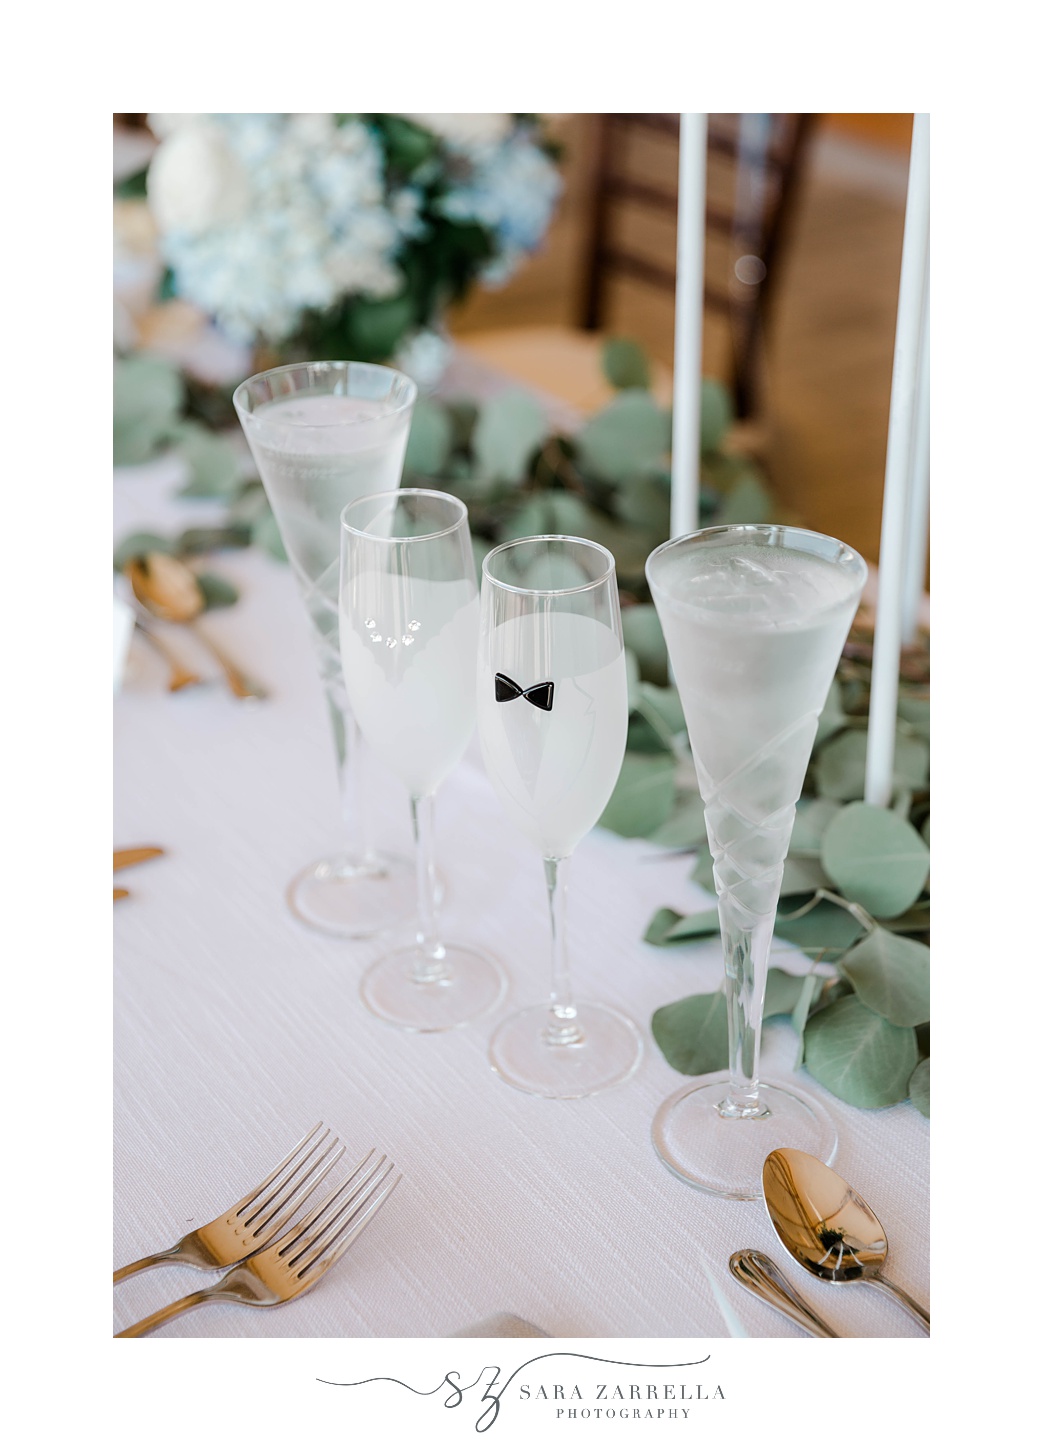 Champagne glasses with stickers for bride and groom